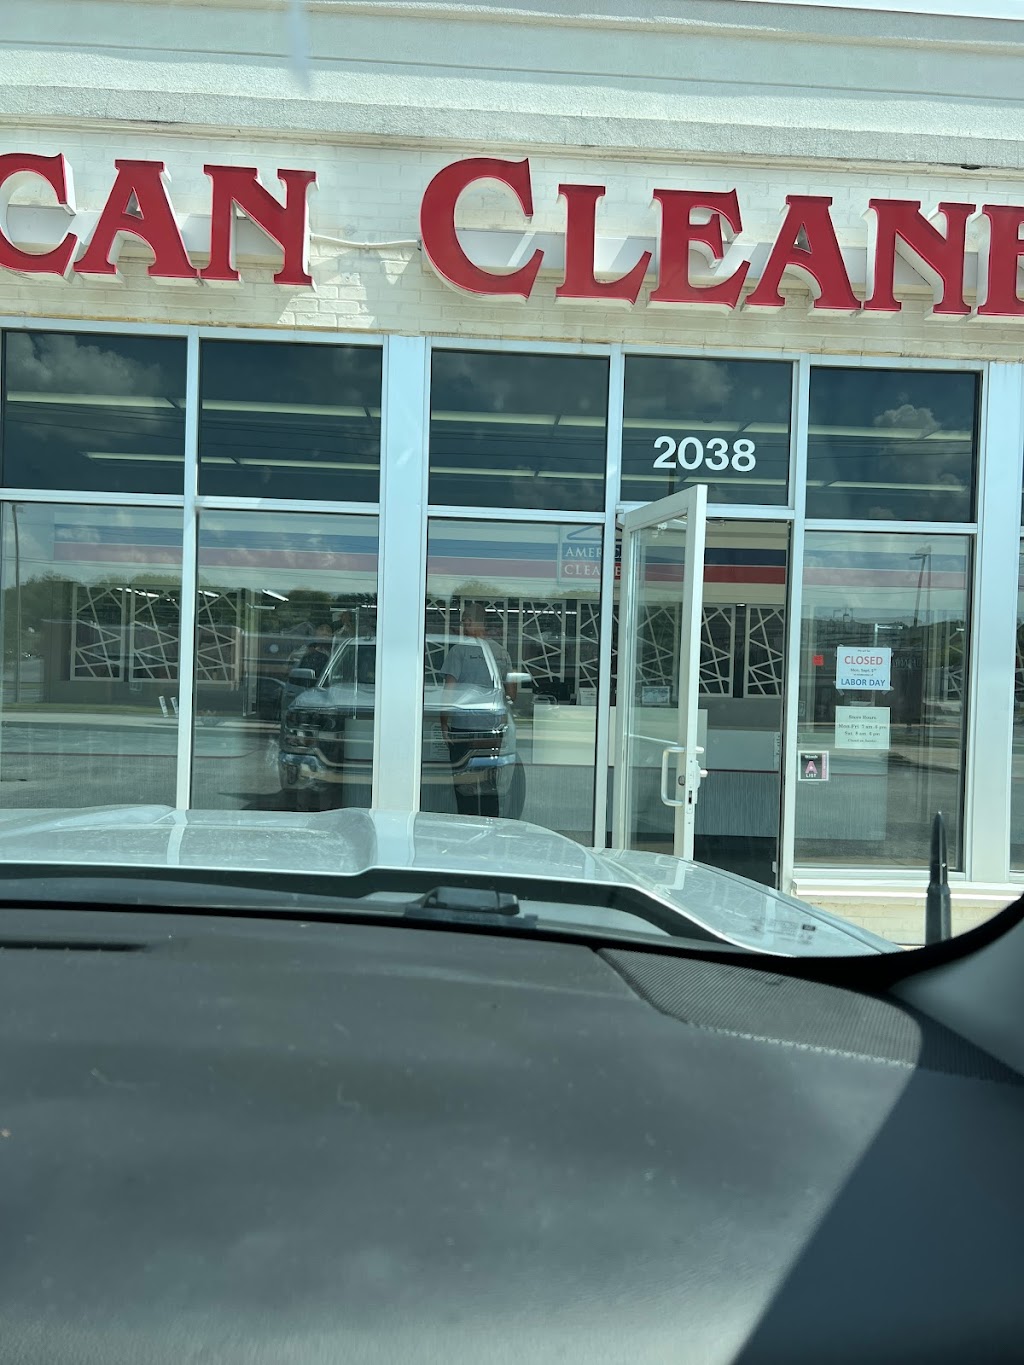 American Cleaners | 2038 McKelvey Rd, Maryland Heights, MO 63043, USA | Phone: (314) 878-4024